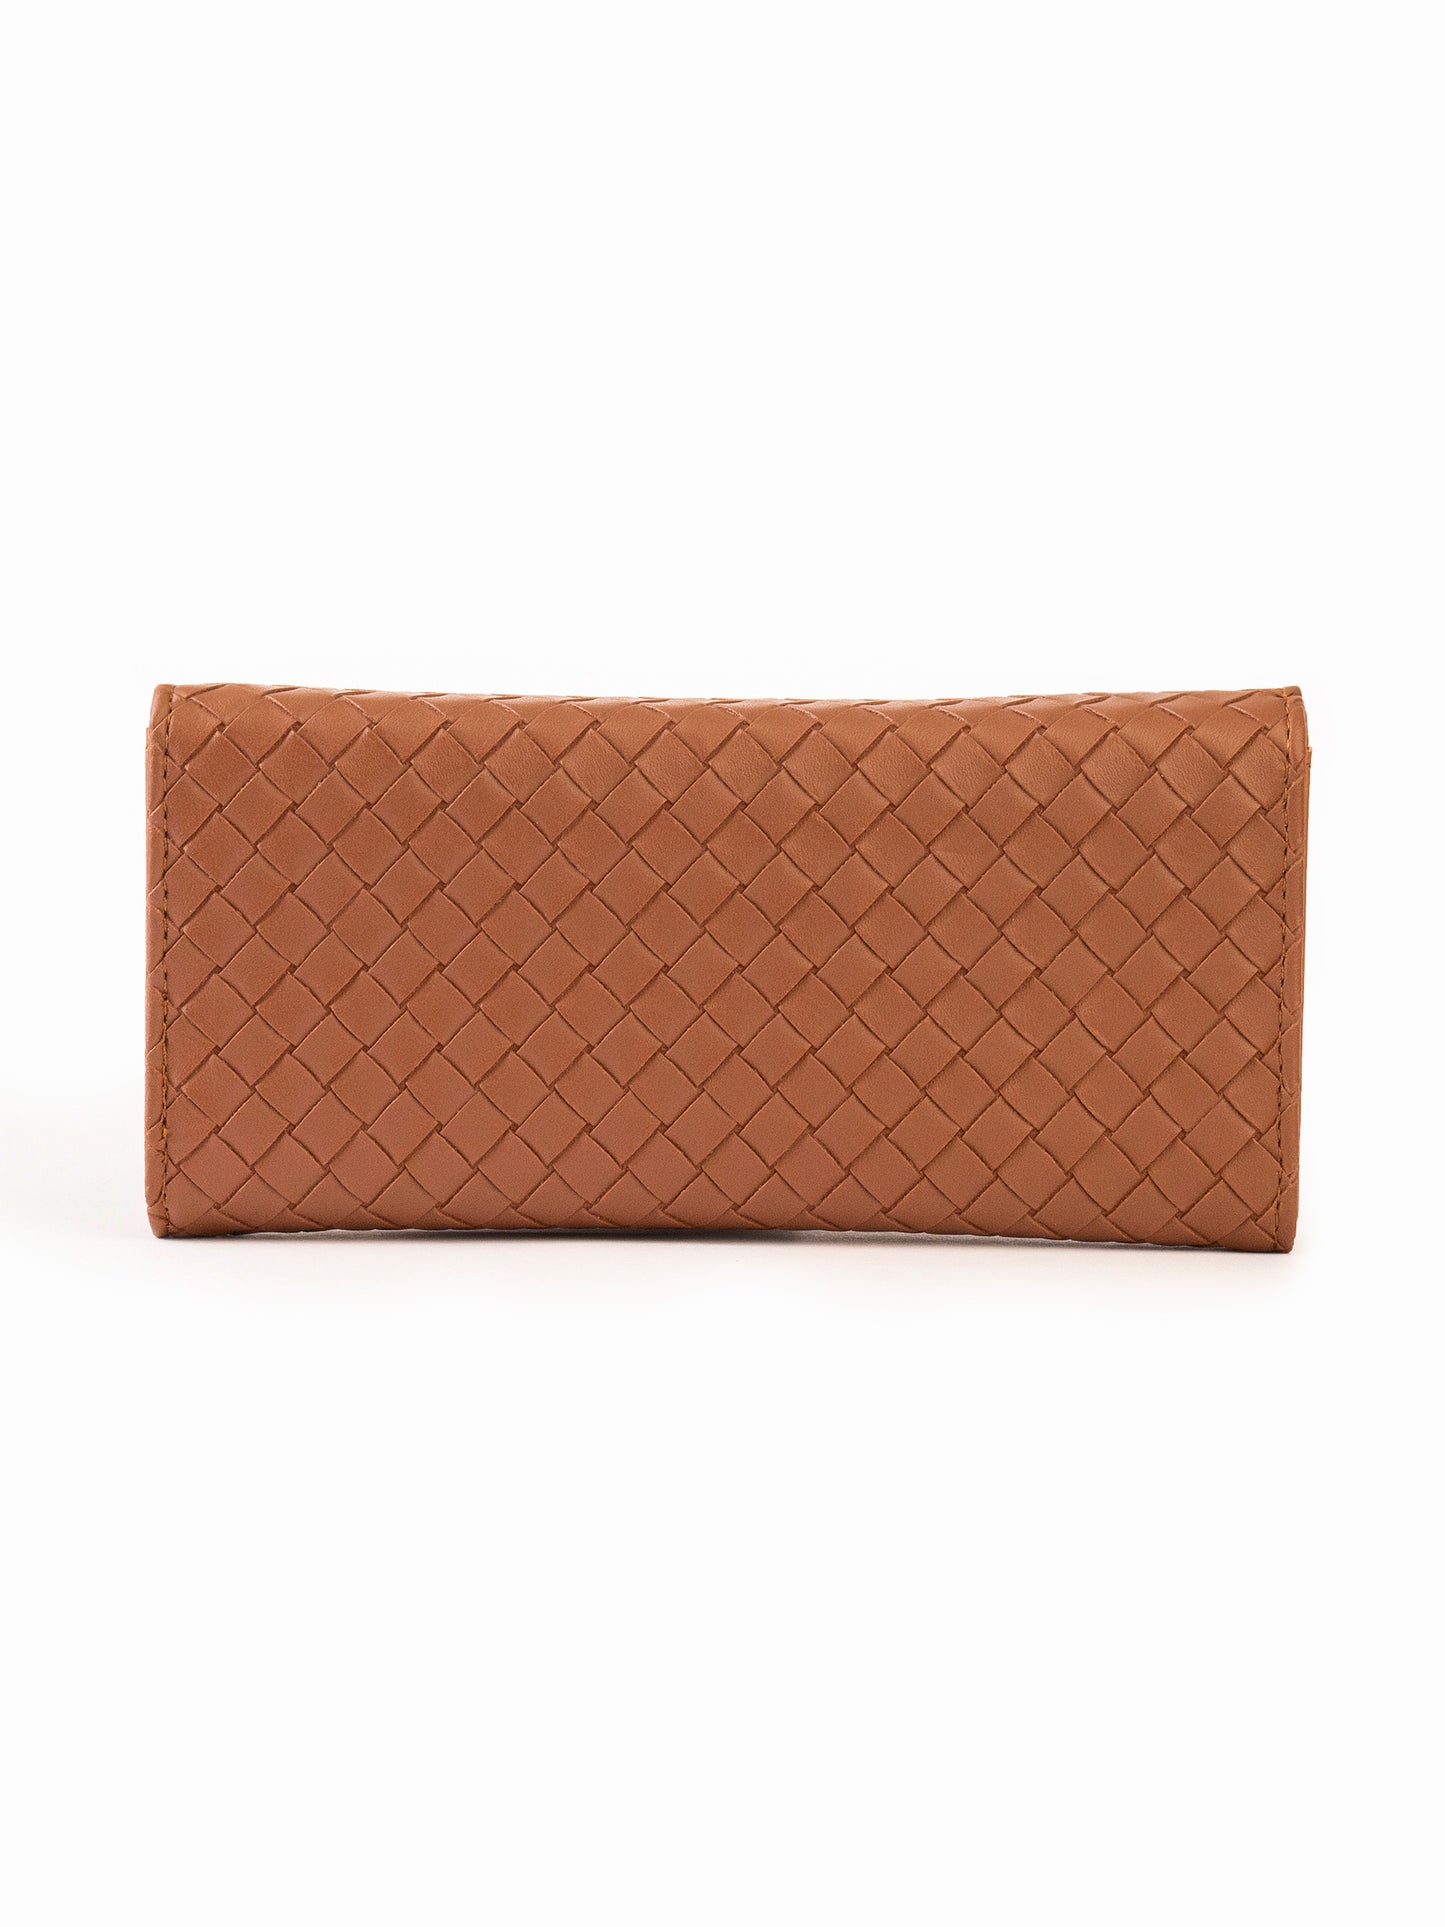 Straw Patterned Wallet